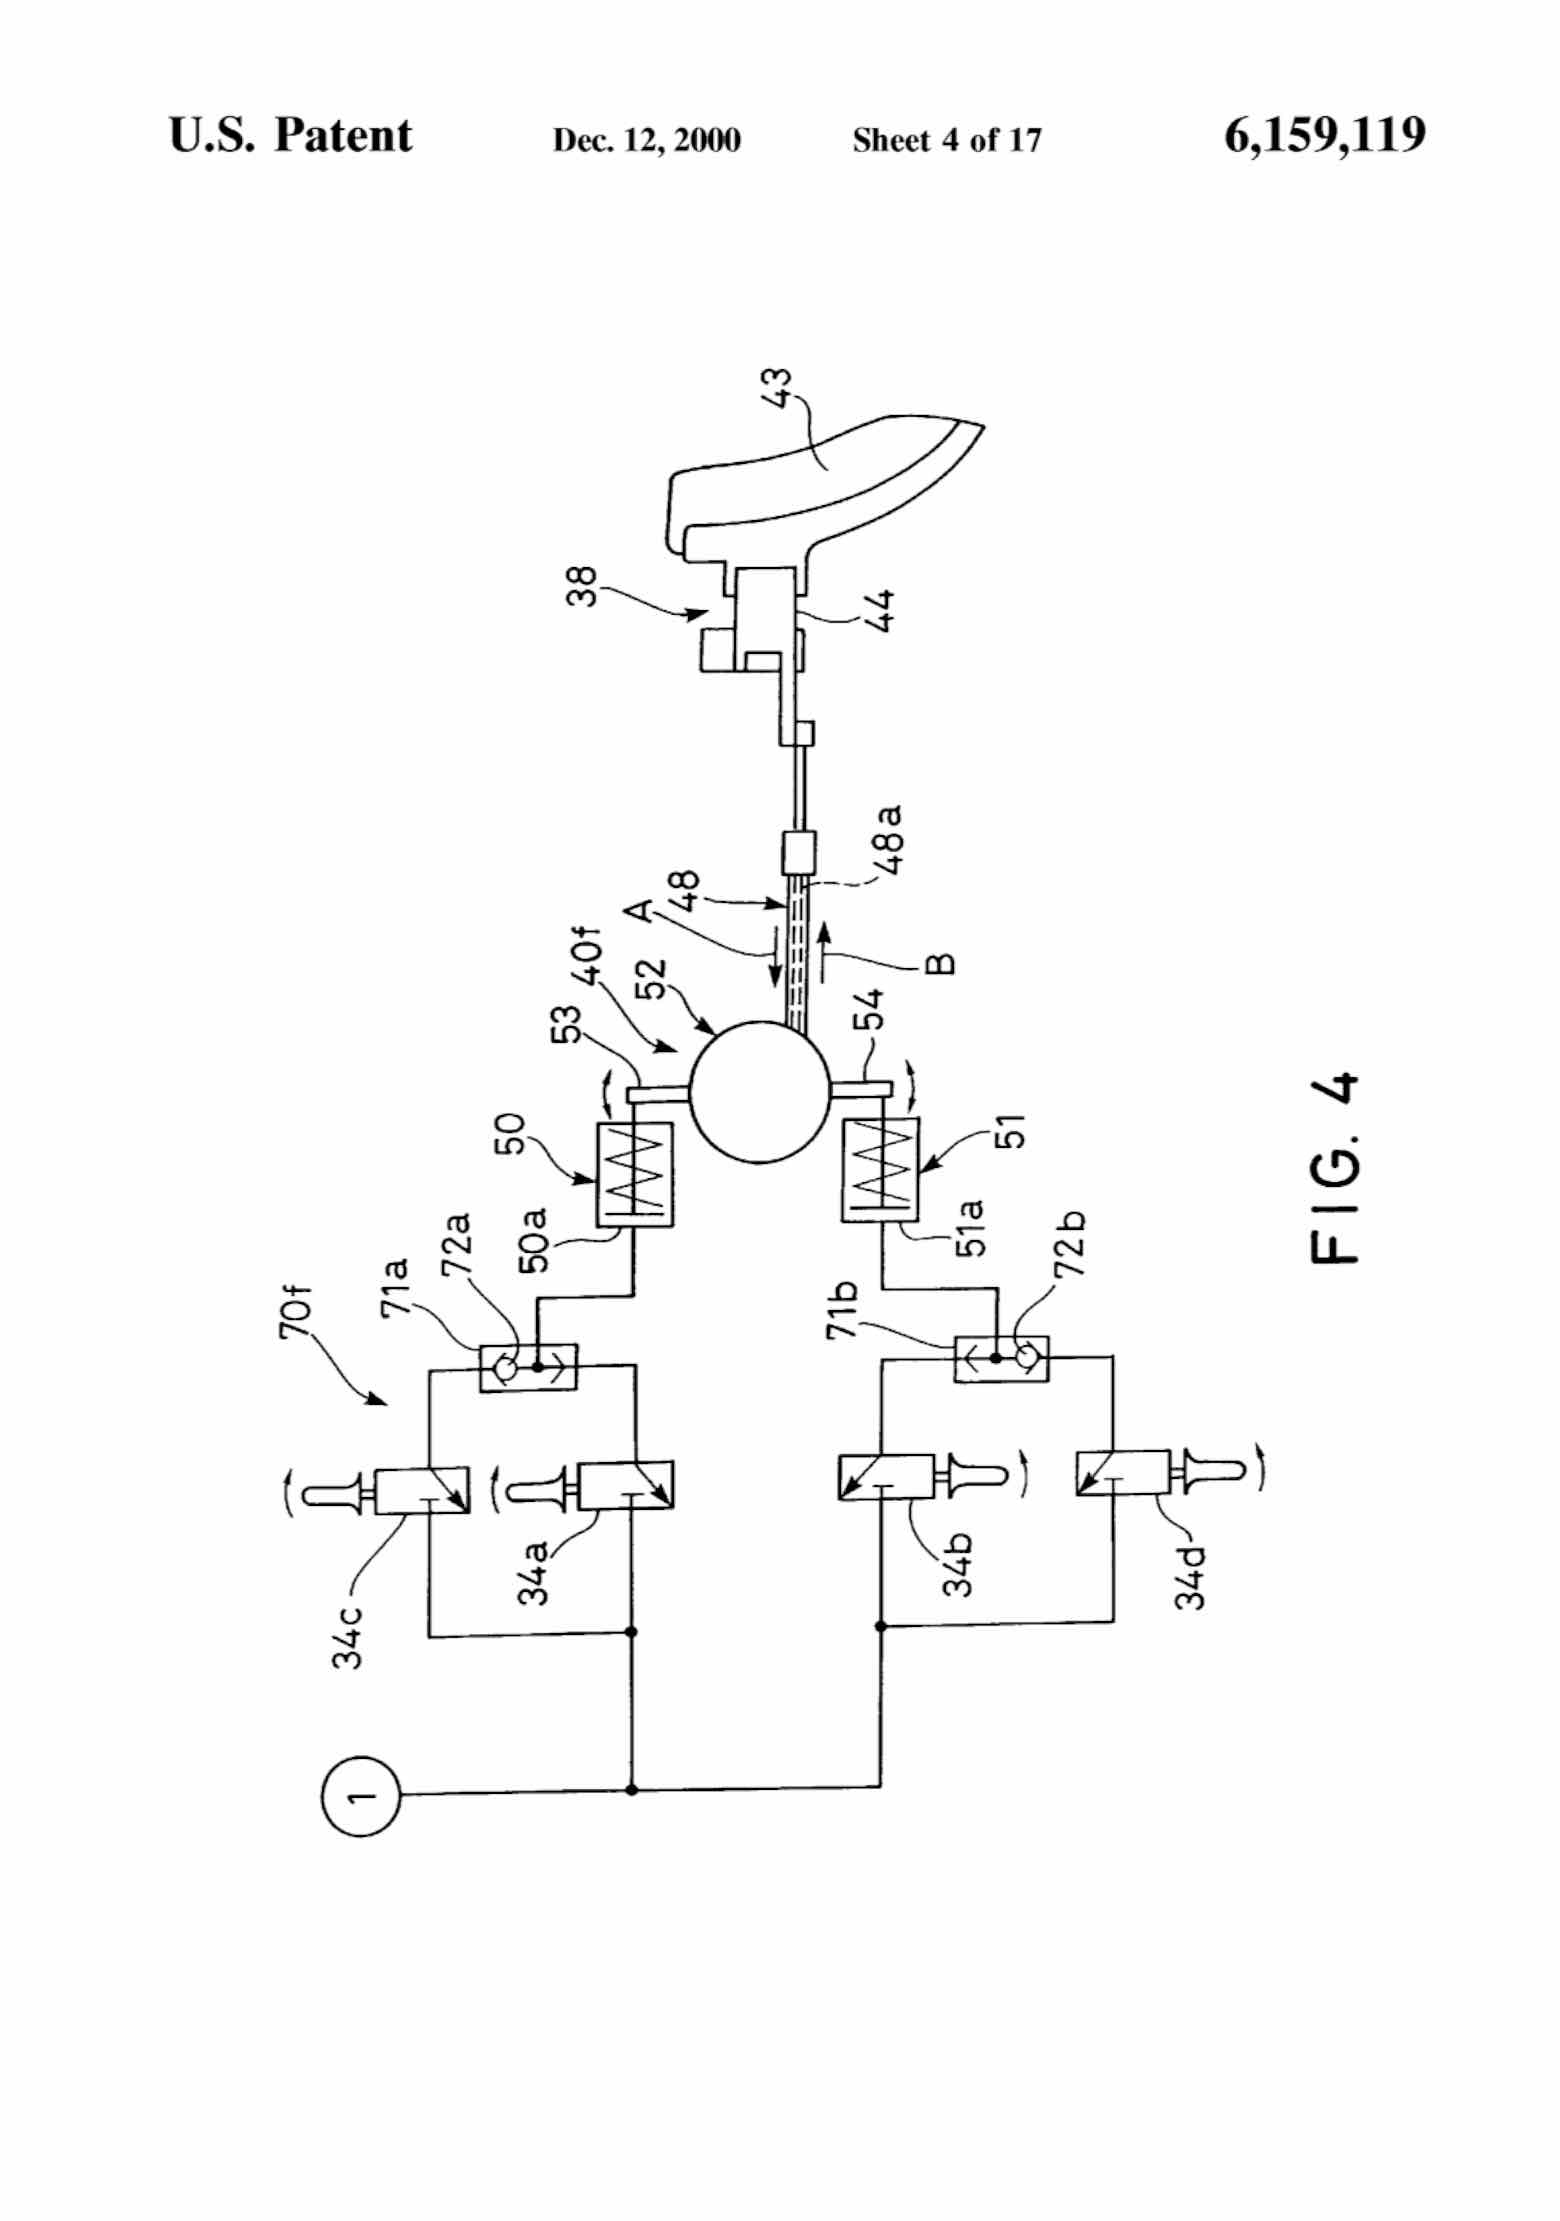 US Patent 6,159,119 - Shimano AirLines scan 5 main image